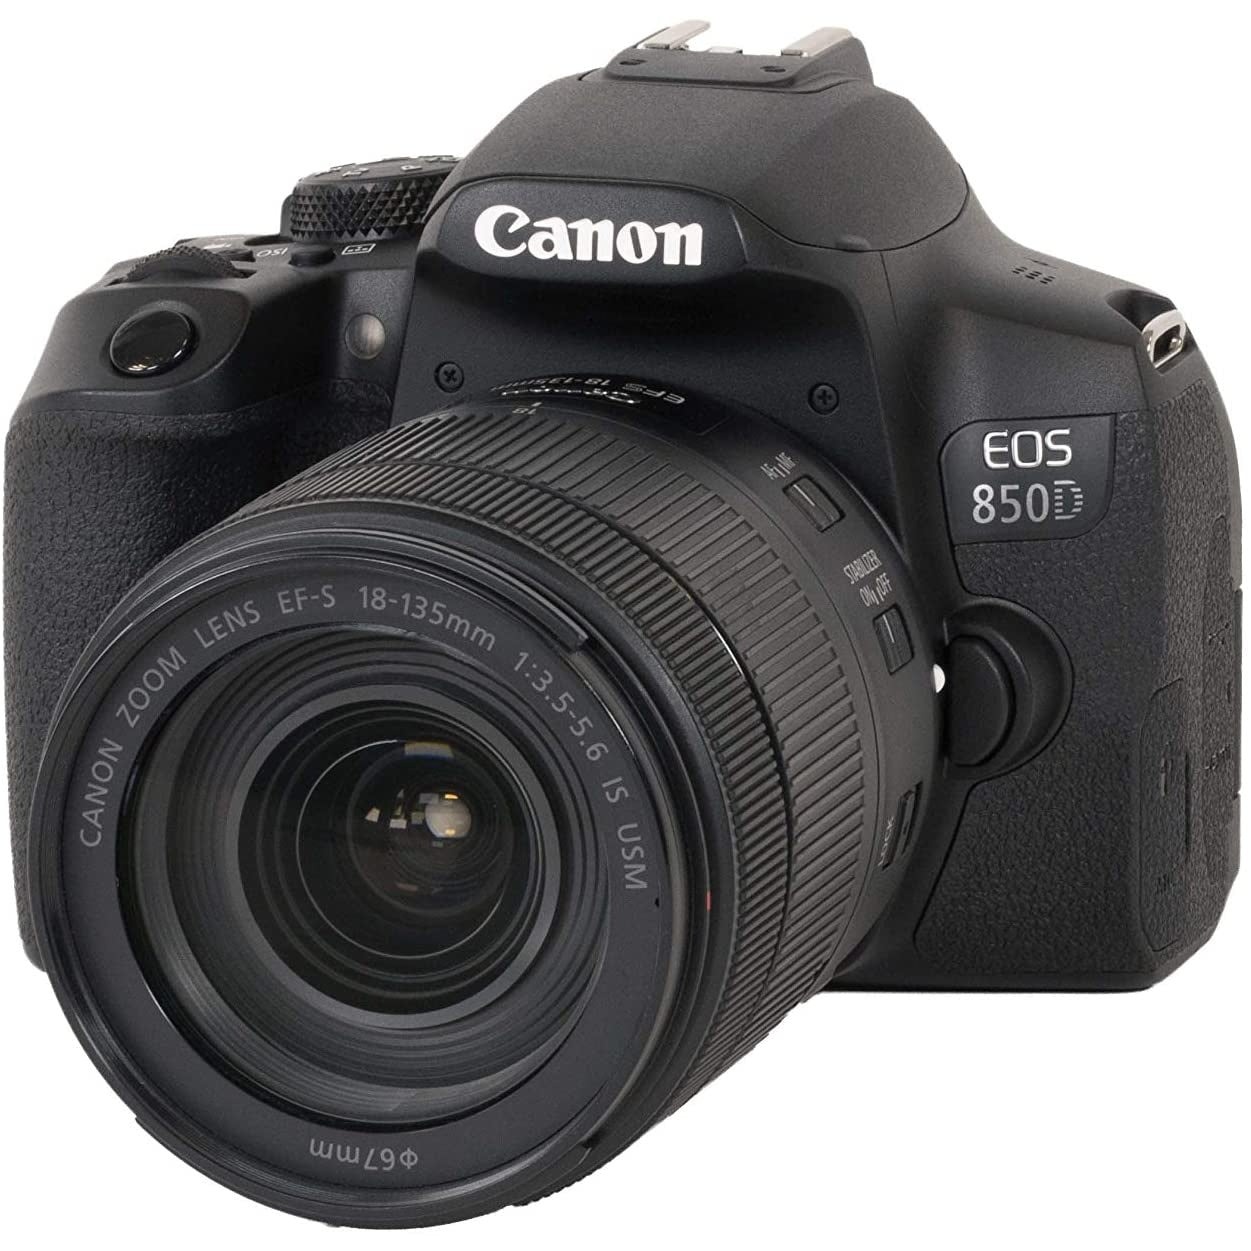 CANON EOS 850D Kit with EF-S 18-135mm f/3.5-5.6 IS USM